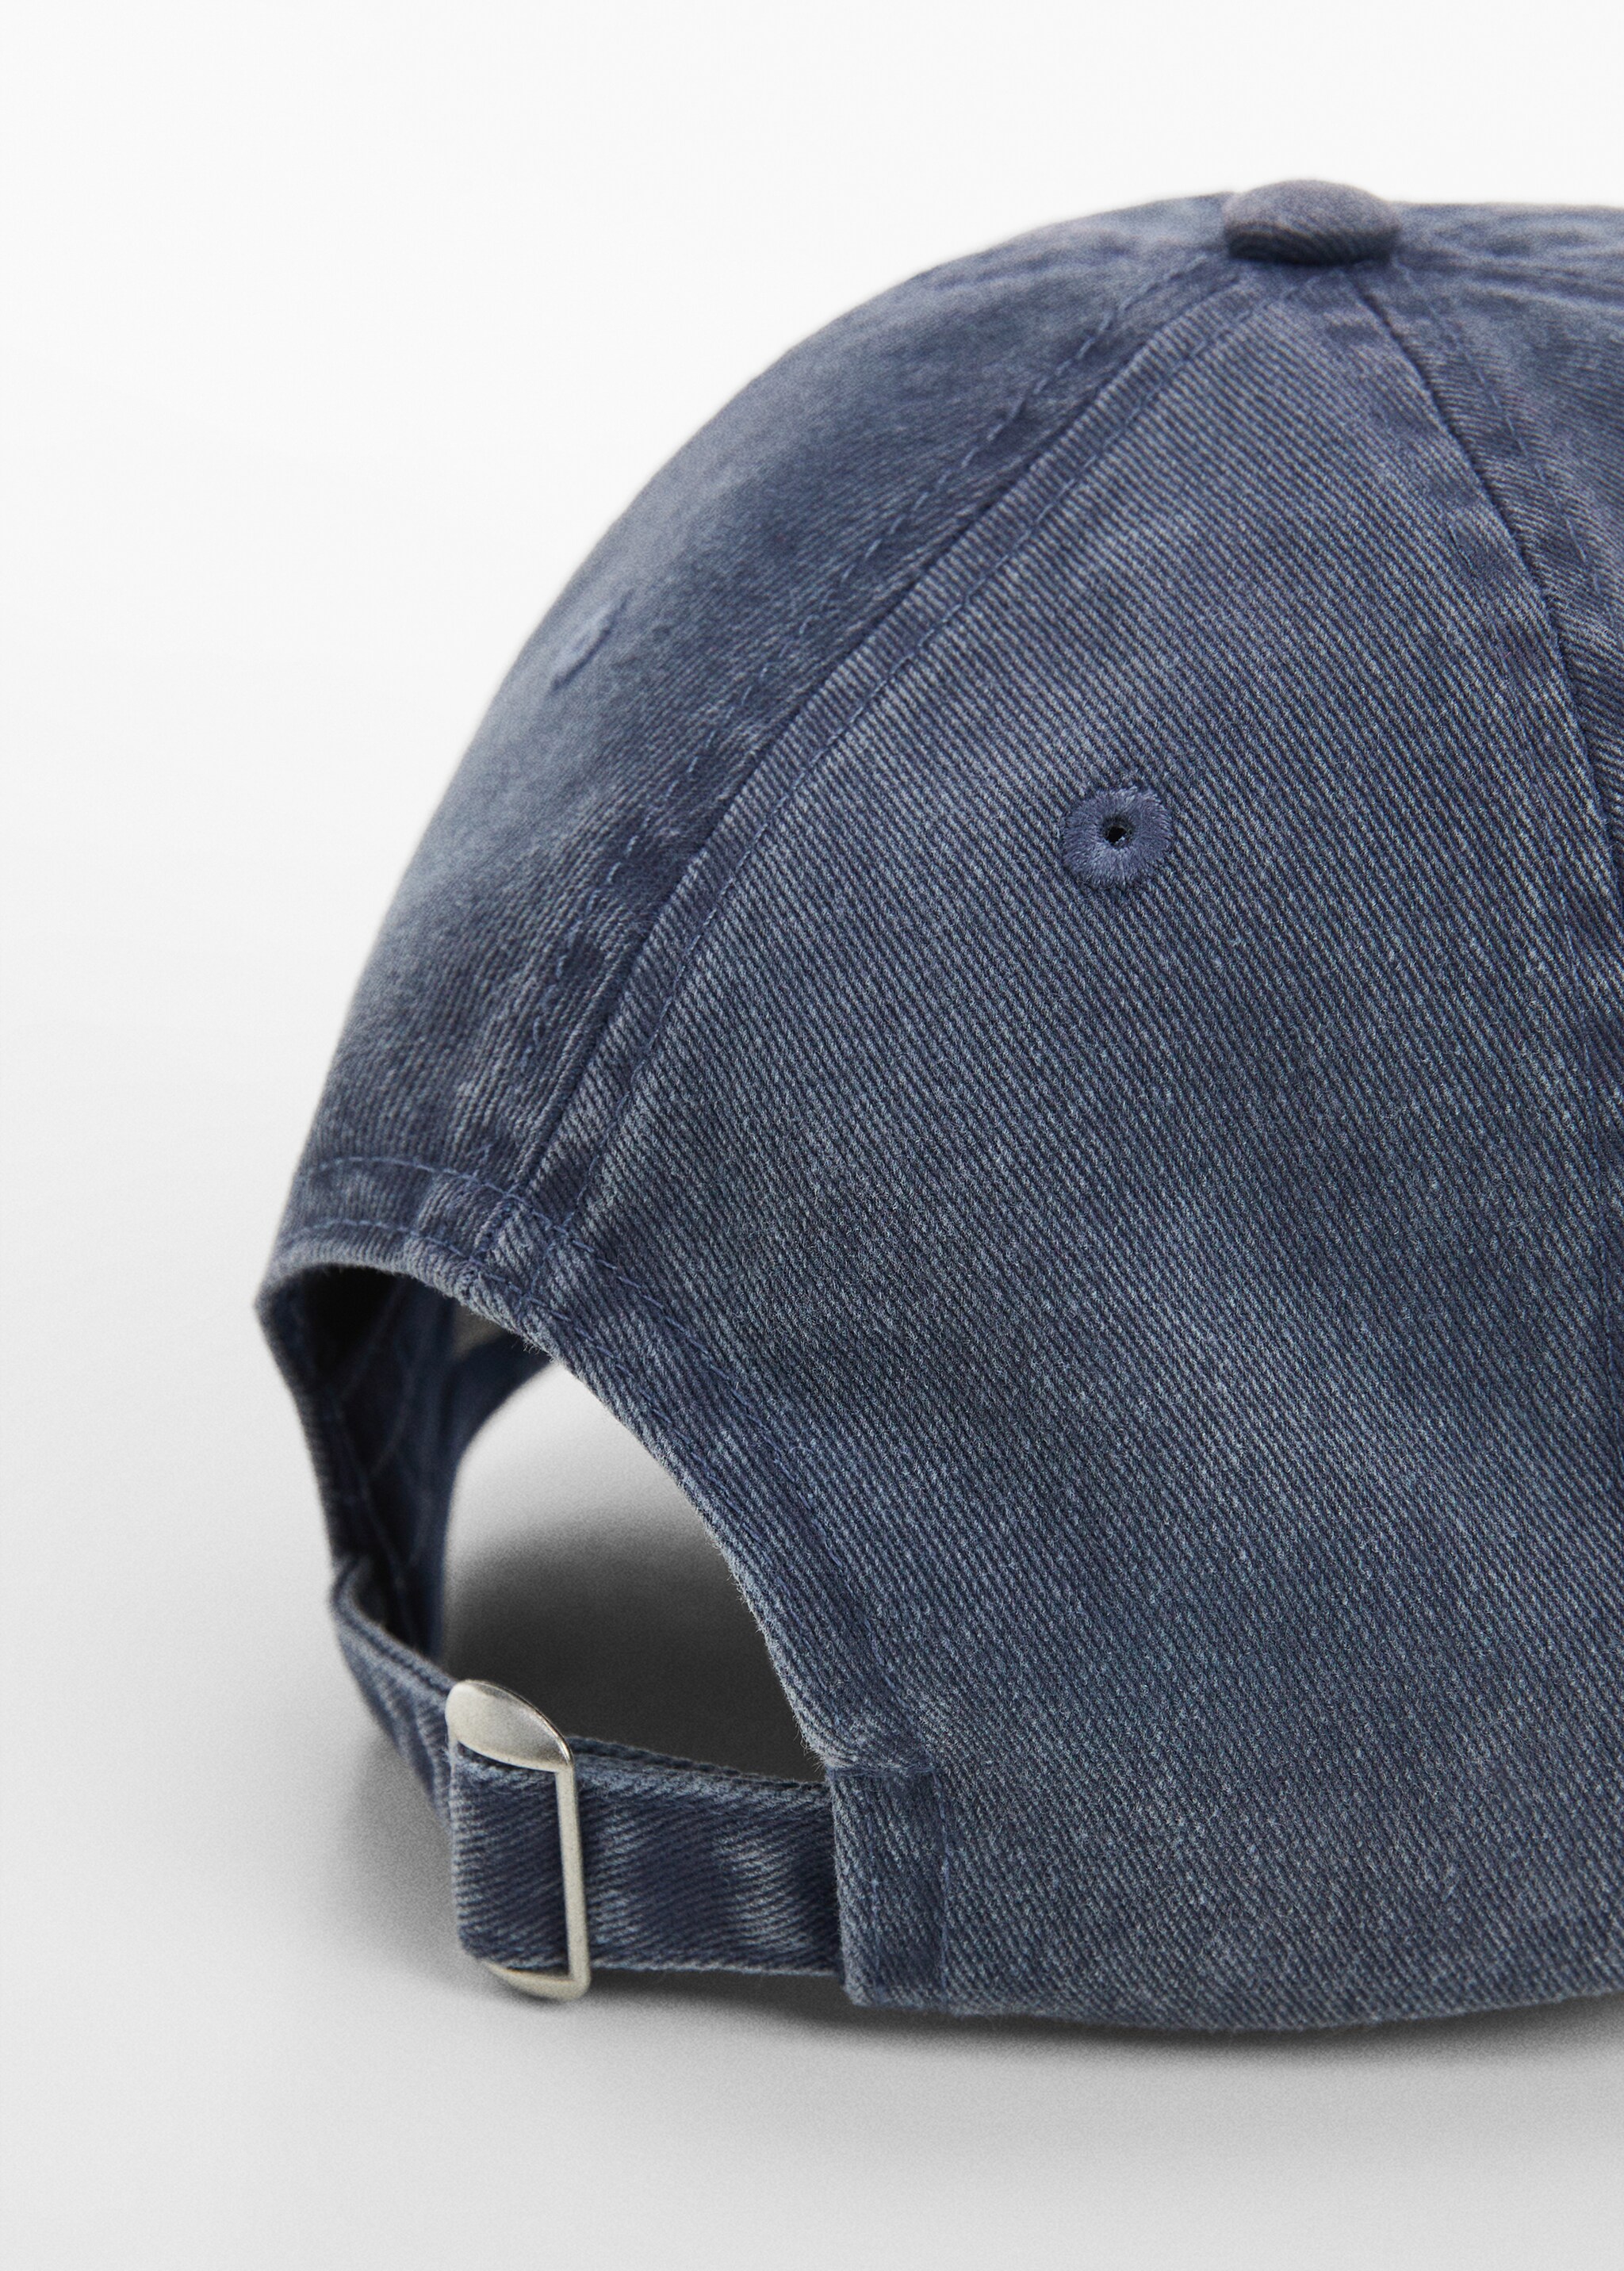 Adjustable basic cap - Details of the article 1